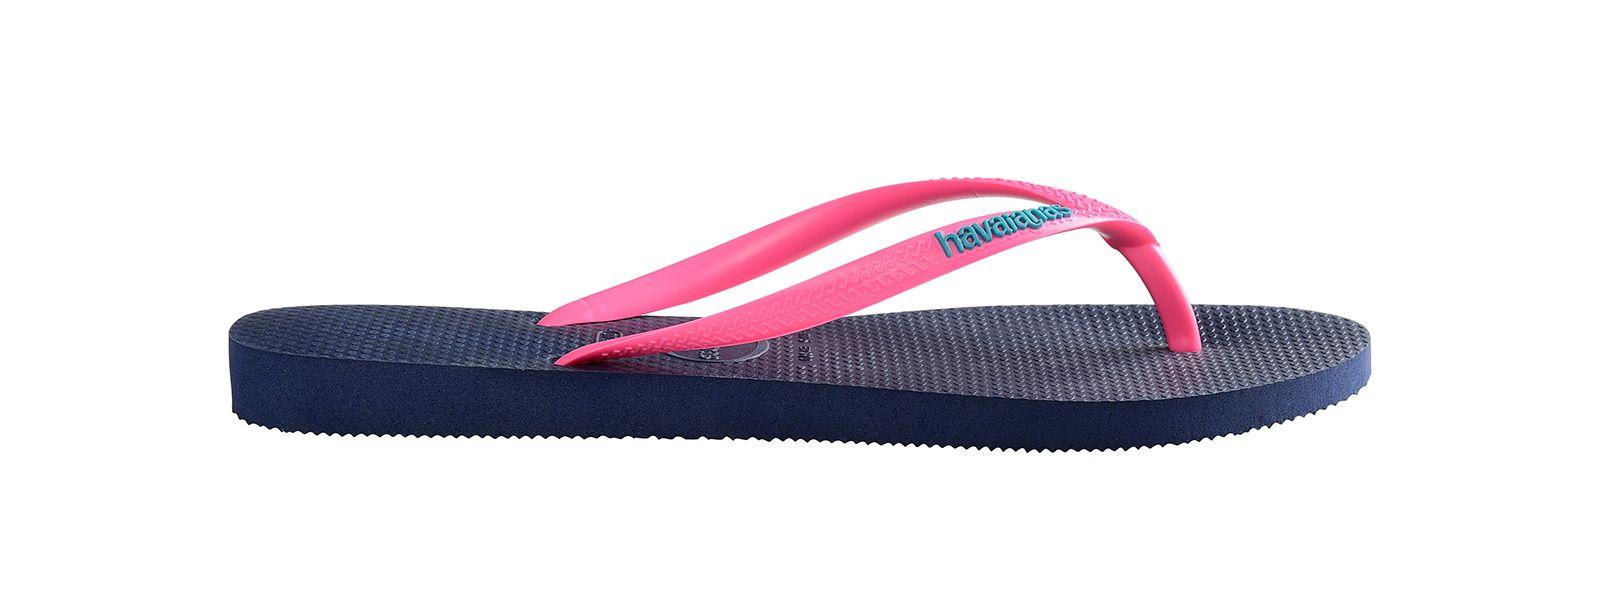 Blue and Pink Logo - Navy Blue Flip-flops And Pink Straps With The Havaianas Logo - Slim ...